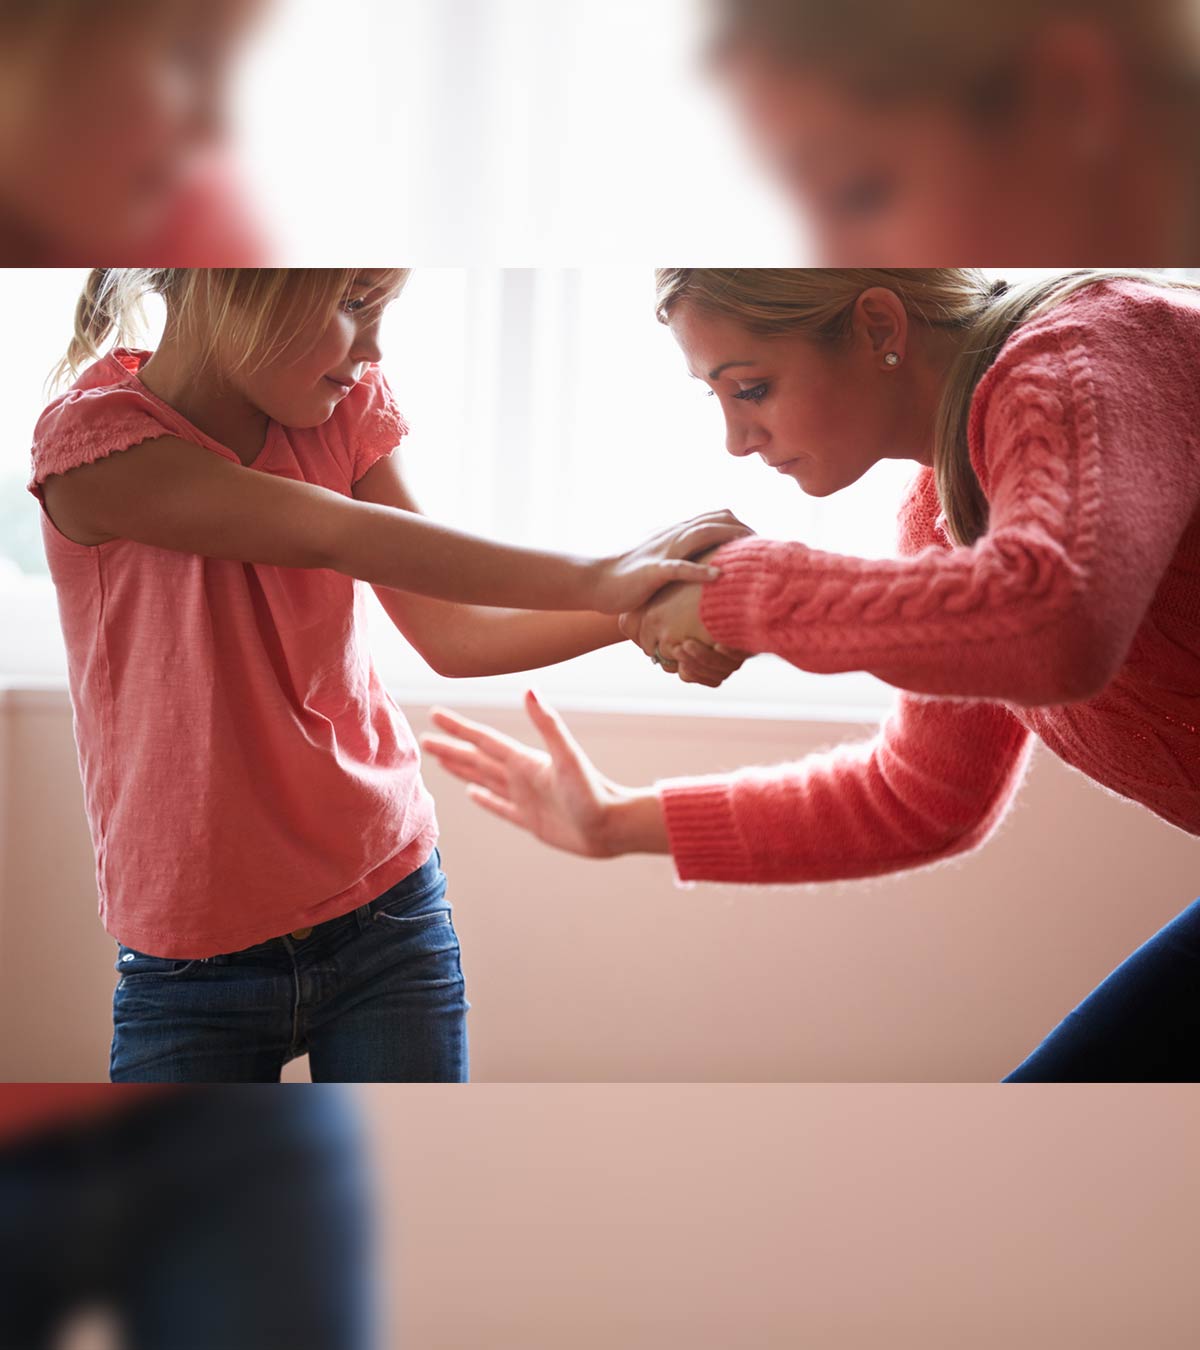 Is Smacking Children Effective And What Are The Alternatives?